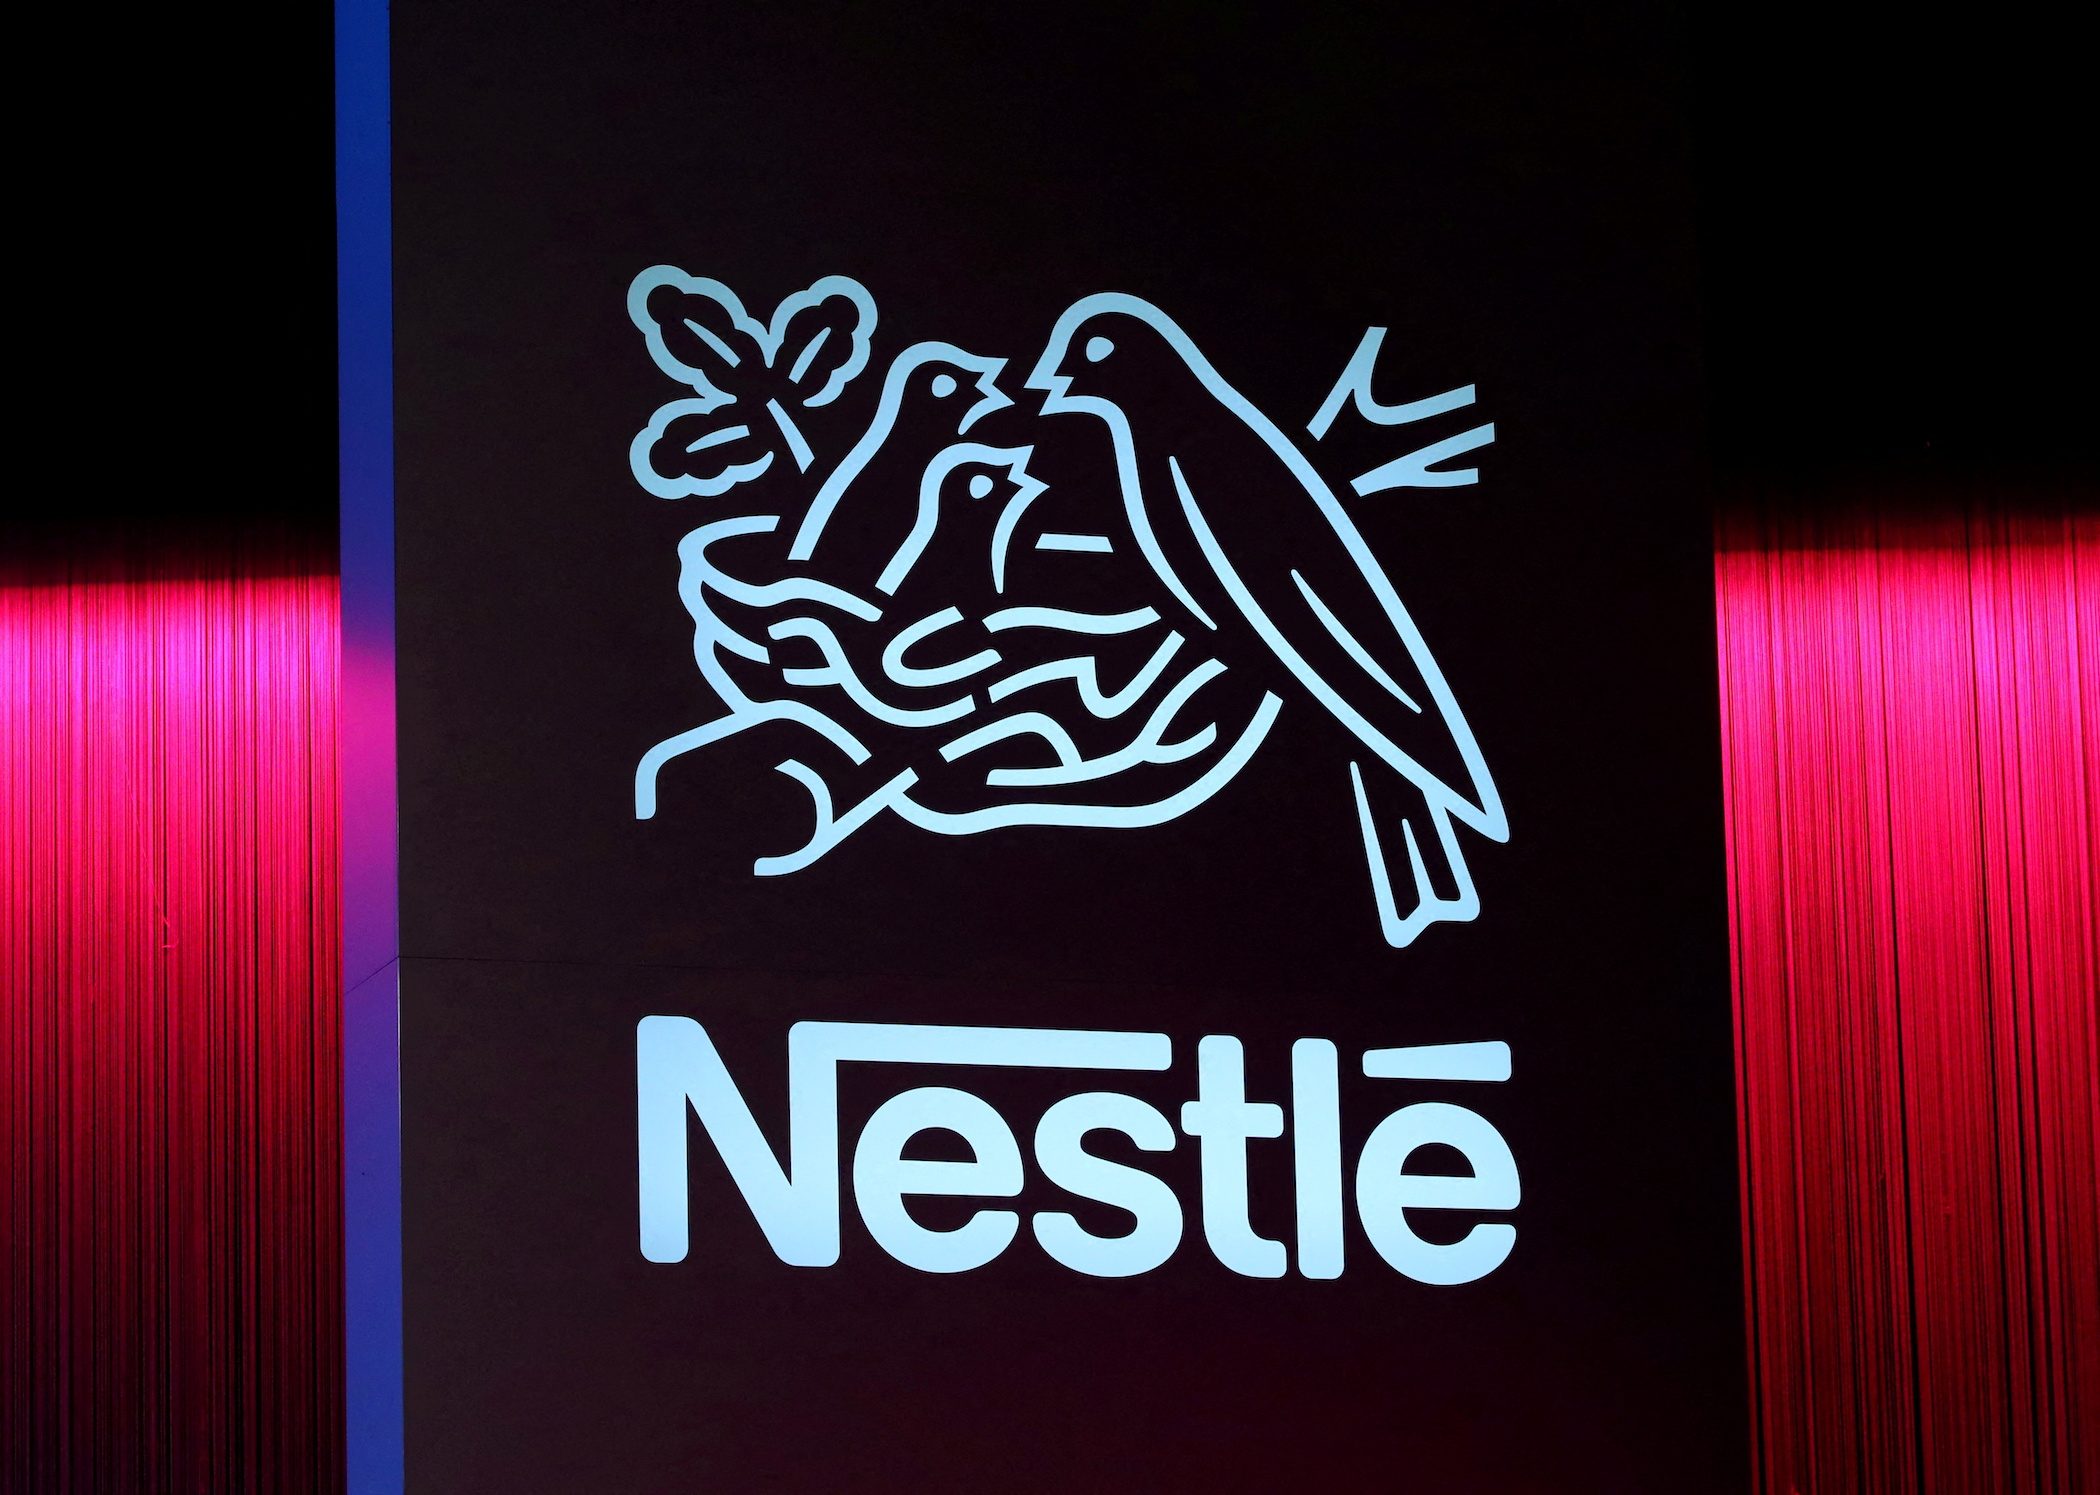 Nestle, tobacco groups, gamemaker Sony join move away from Russia